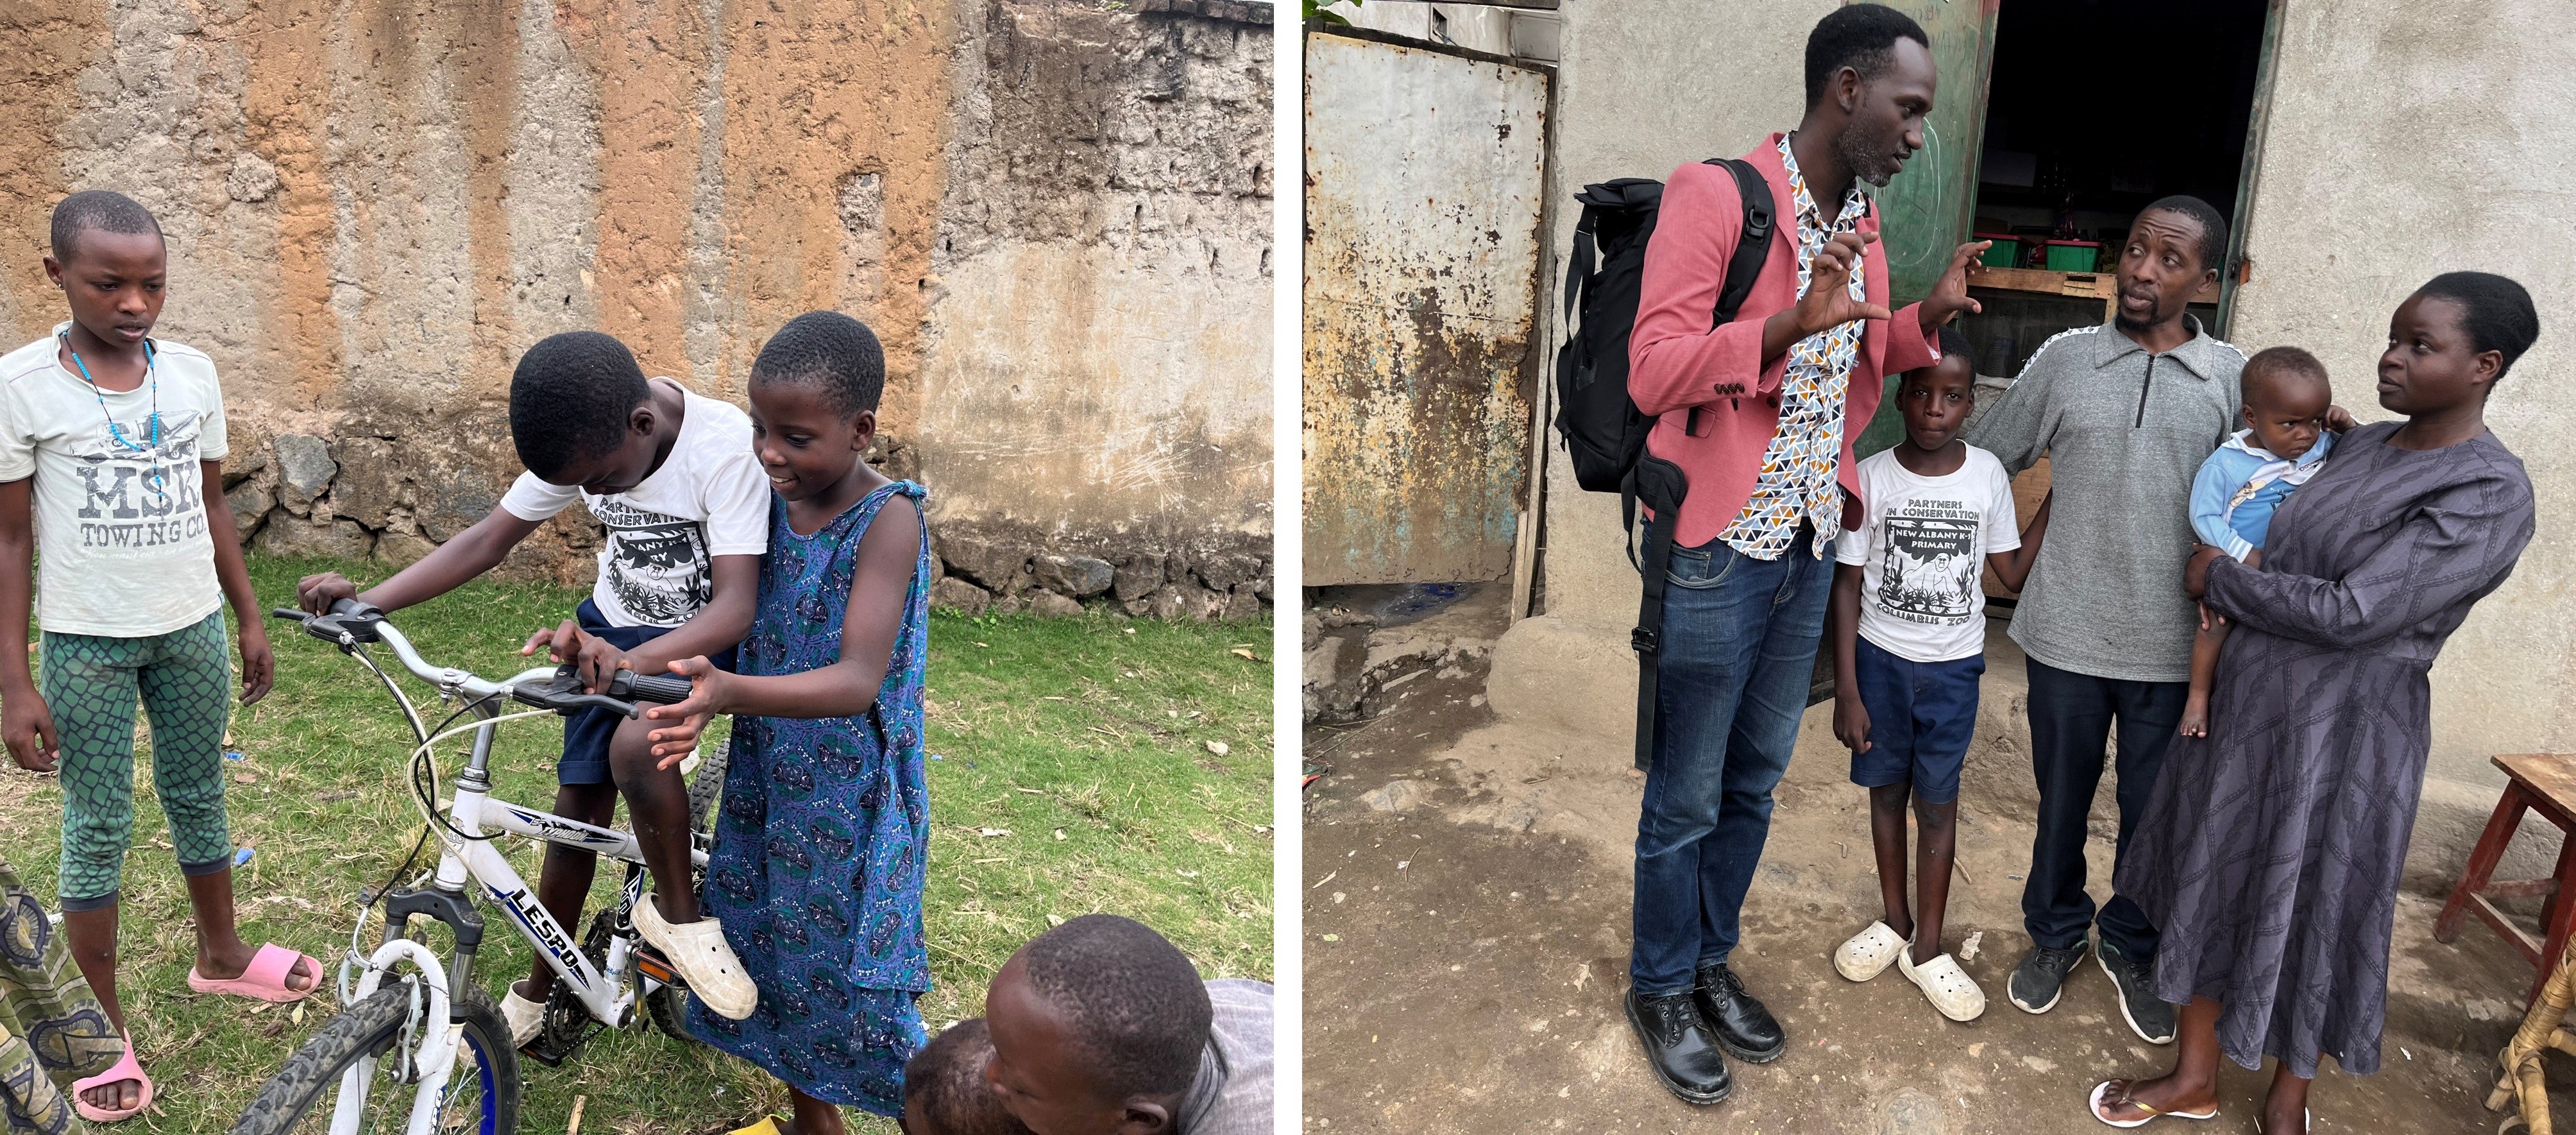 Two pictures. Left: A girl helps here brother with cerebral palsy ride a bike. Right: Alain talks to a family. Mother and father next to two boys, the older one looks at the camera and the young child is in his mother's arms. 